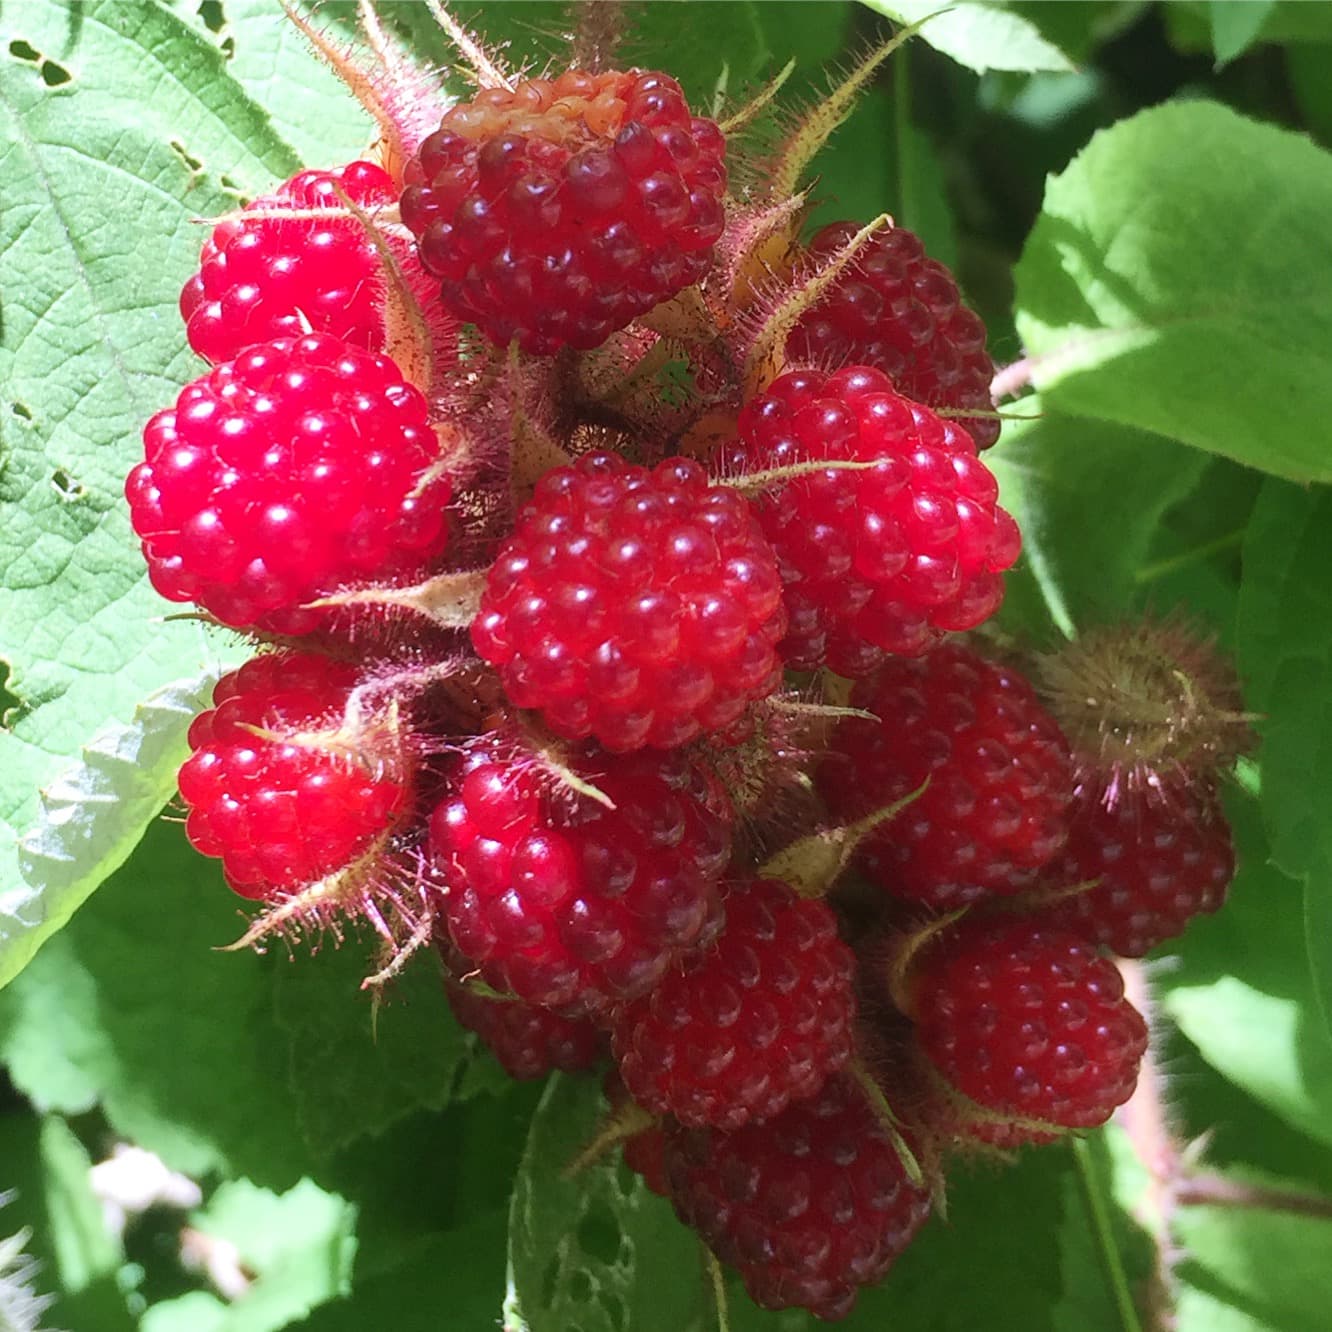 Wineberries are some of the most beautiful and delicious berries I've ever encountered.